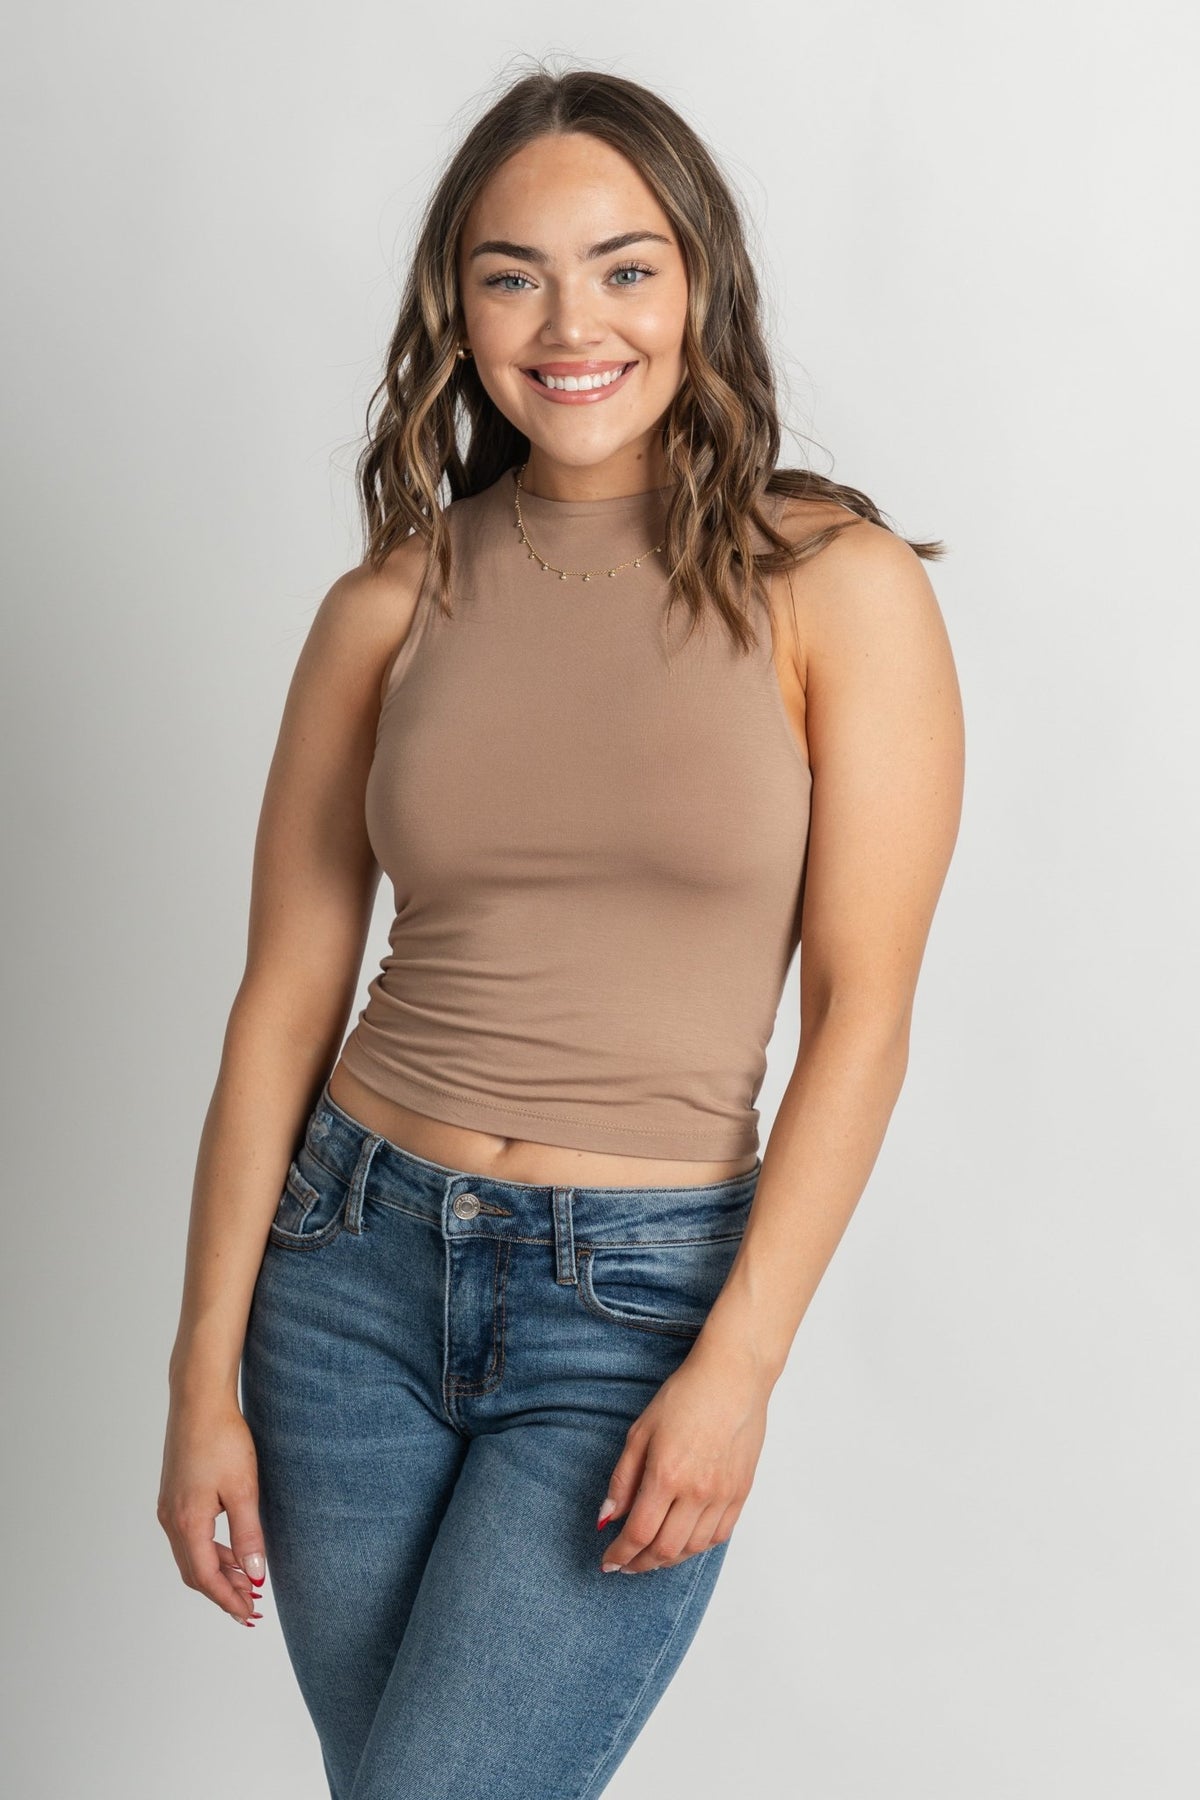 Modal high neck tank top taupe - Cute Tank Top - Trendy Tank Tops at Lush Fashion Lounge Boutique in Oklahoma City